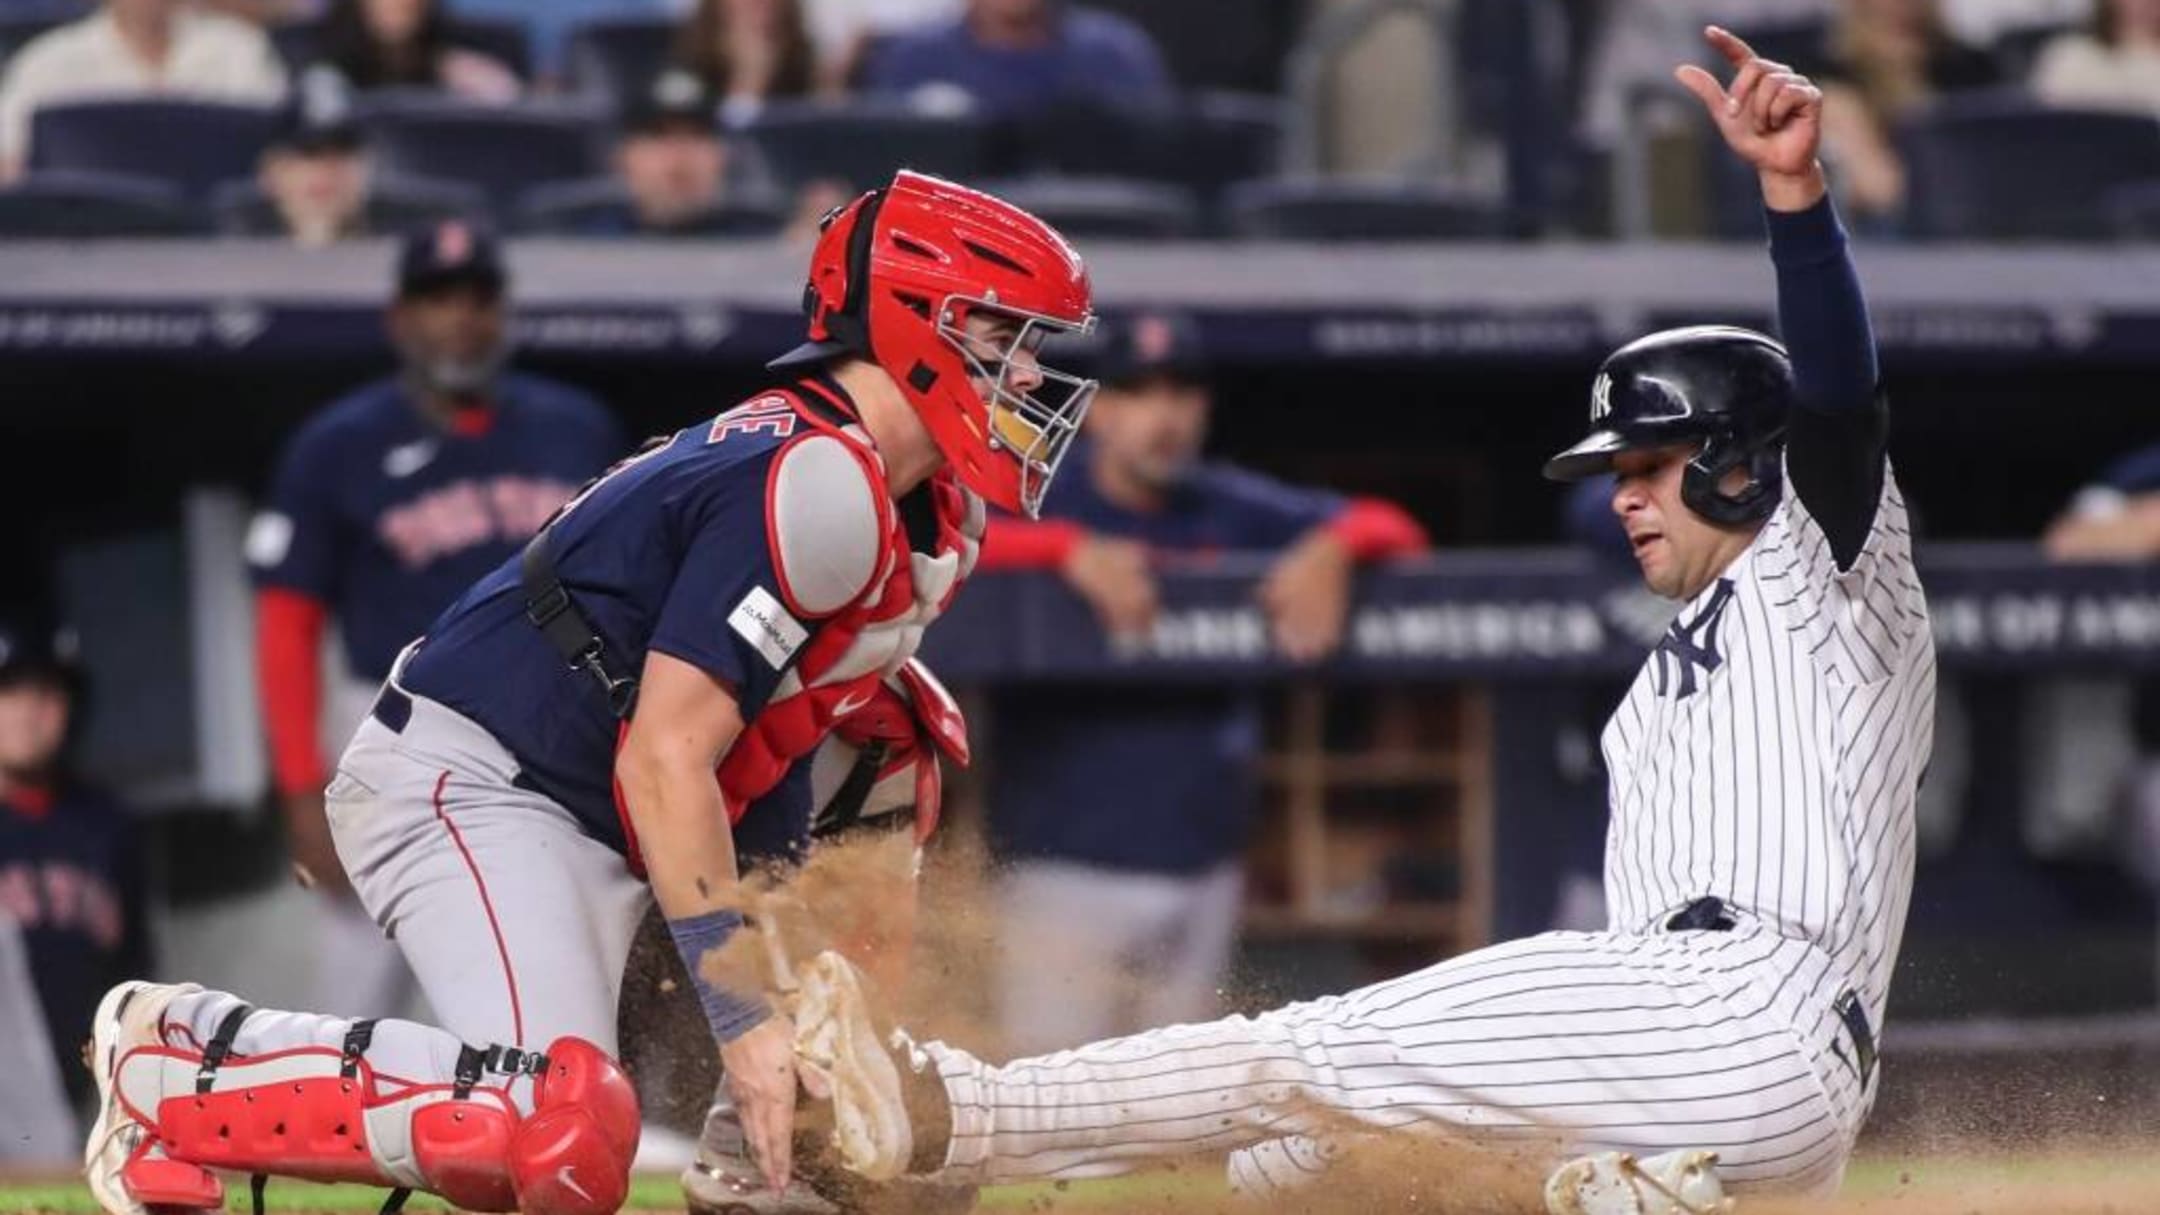 New York Yankees vs Boston Red Sox how to watch online, MLB free live stream, TV channel and start time Yardbarker